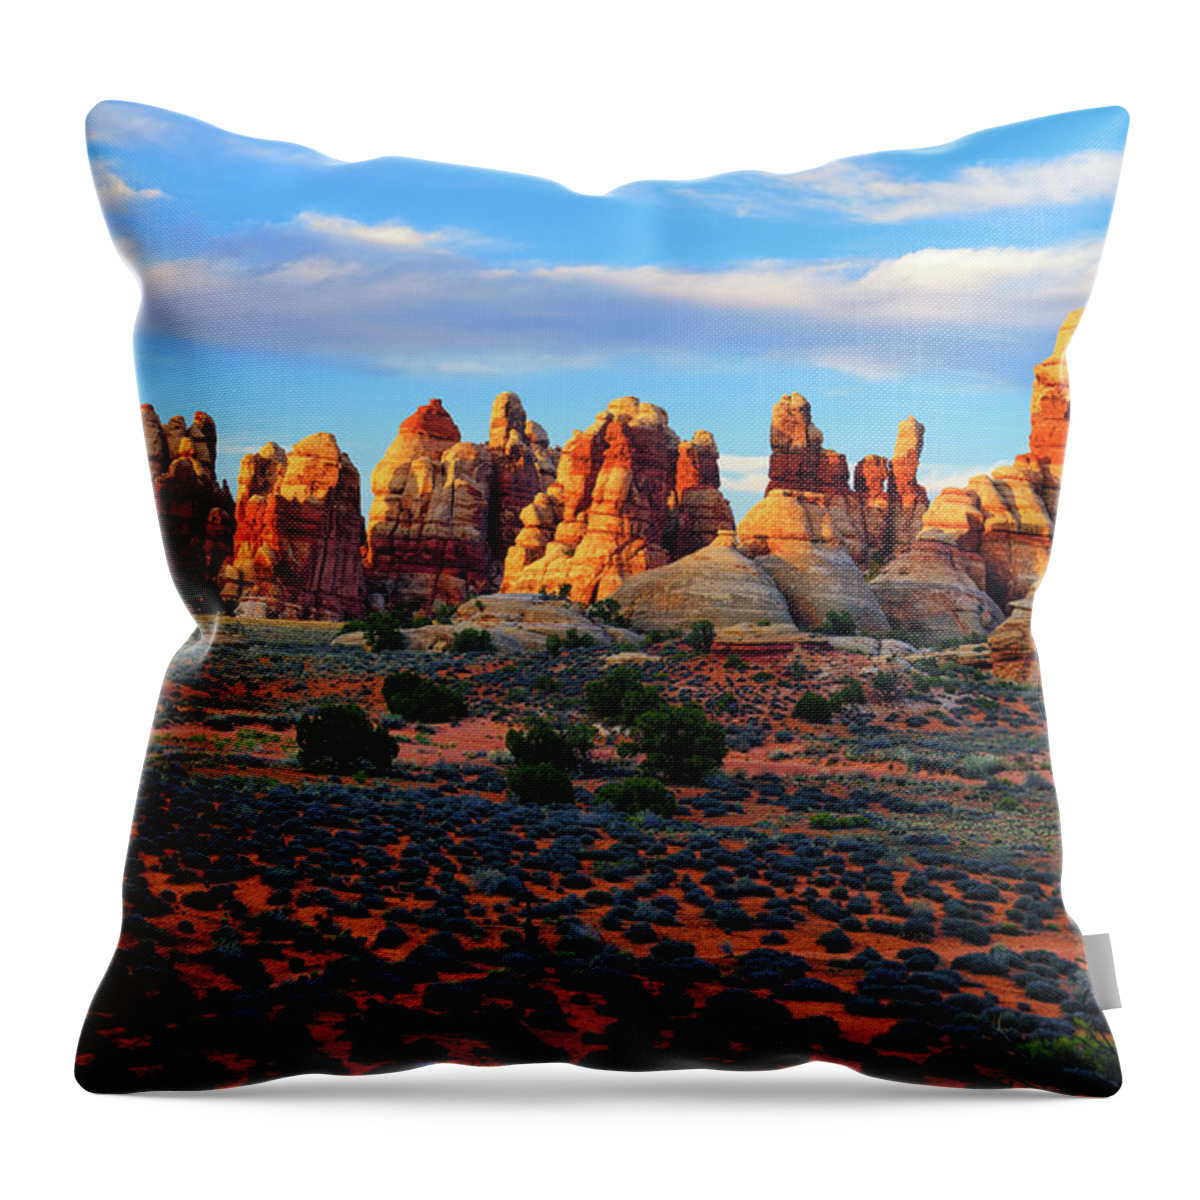 Doll House Throw Pillow featuring the photograph Evening At The Doll House by Greg Norrell